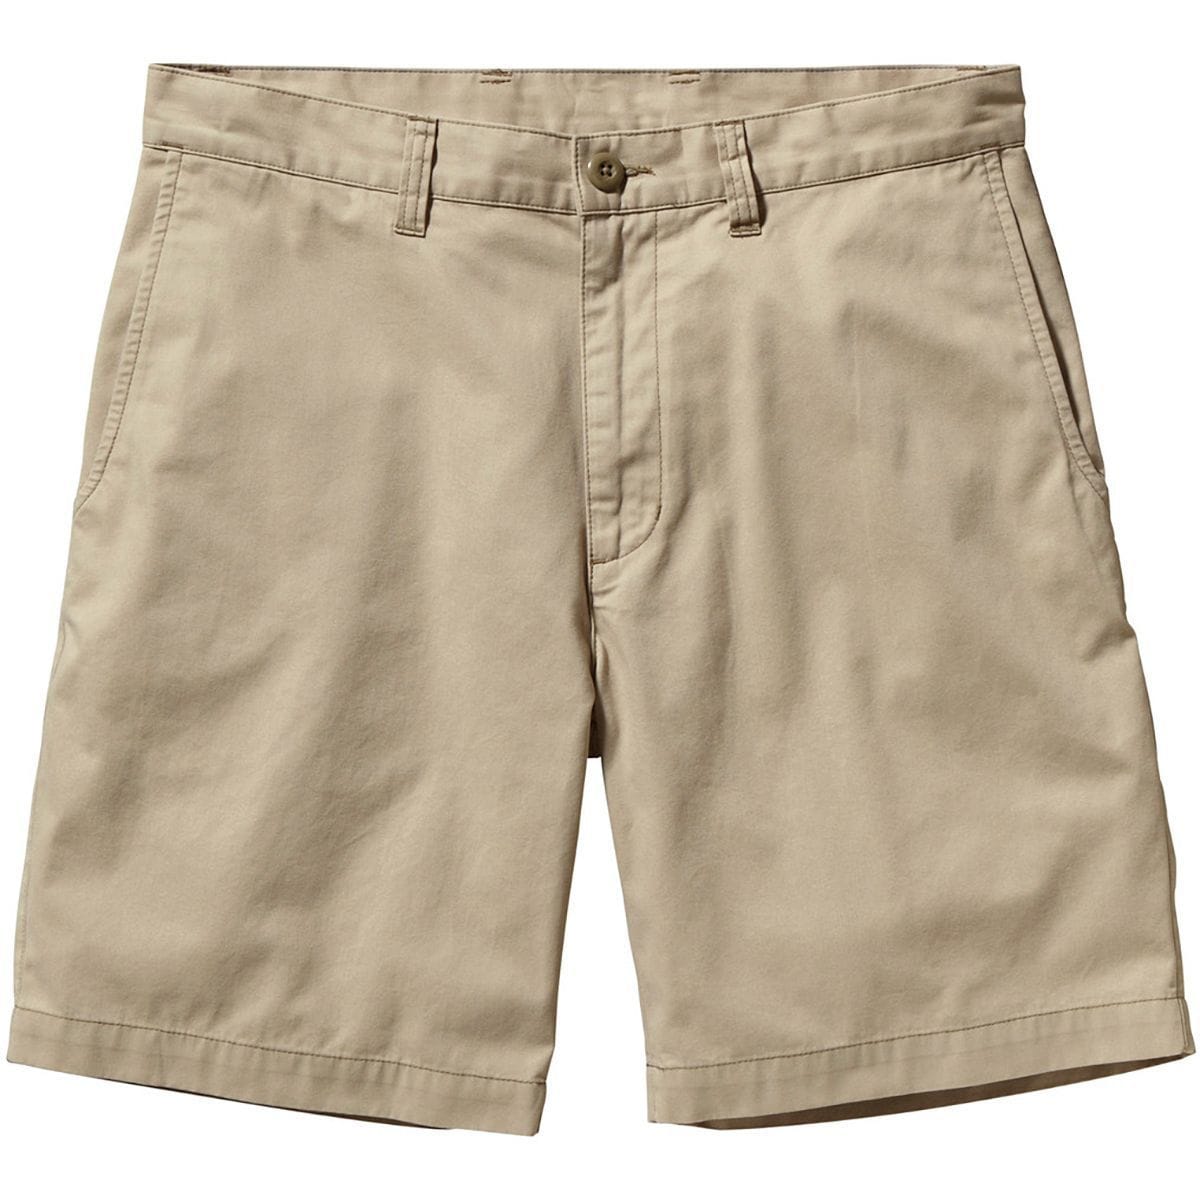 Patagonia All-Wear Short - Men's | Backcountry.com